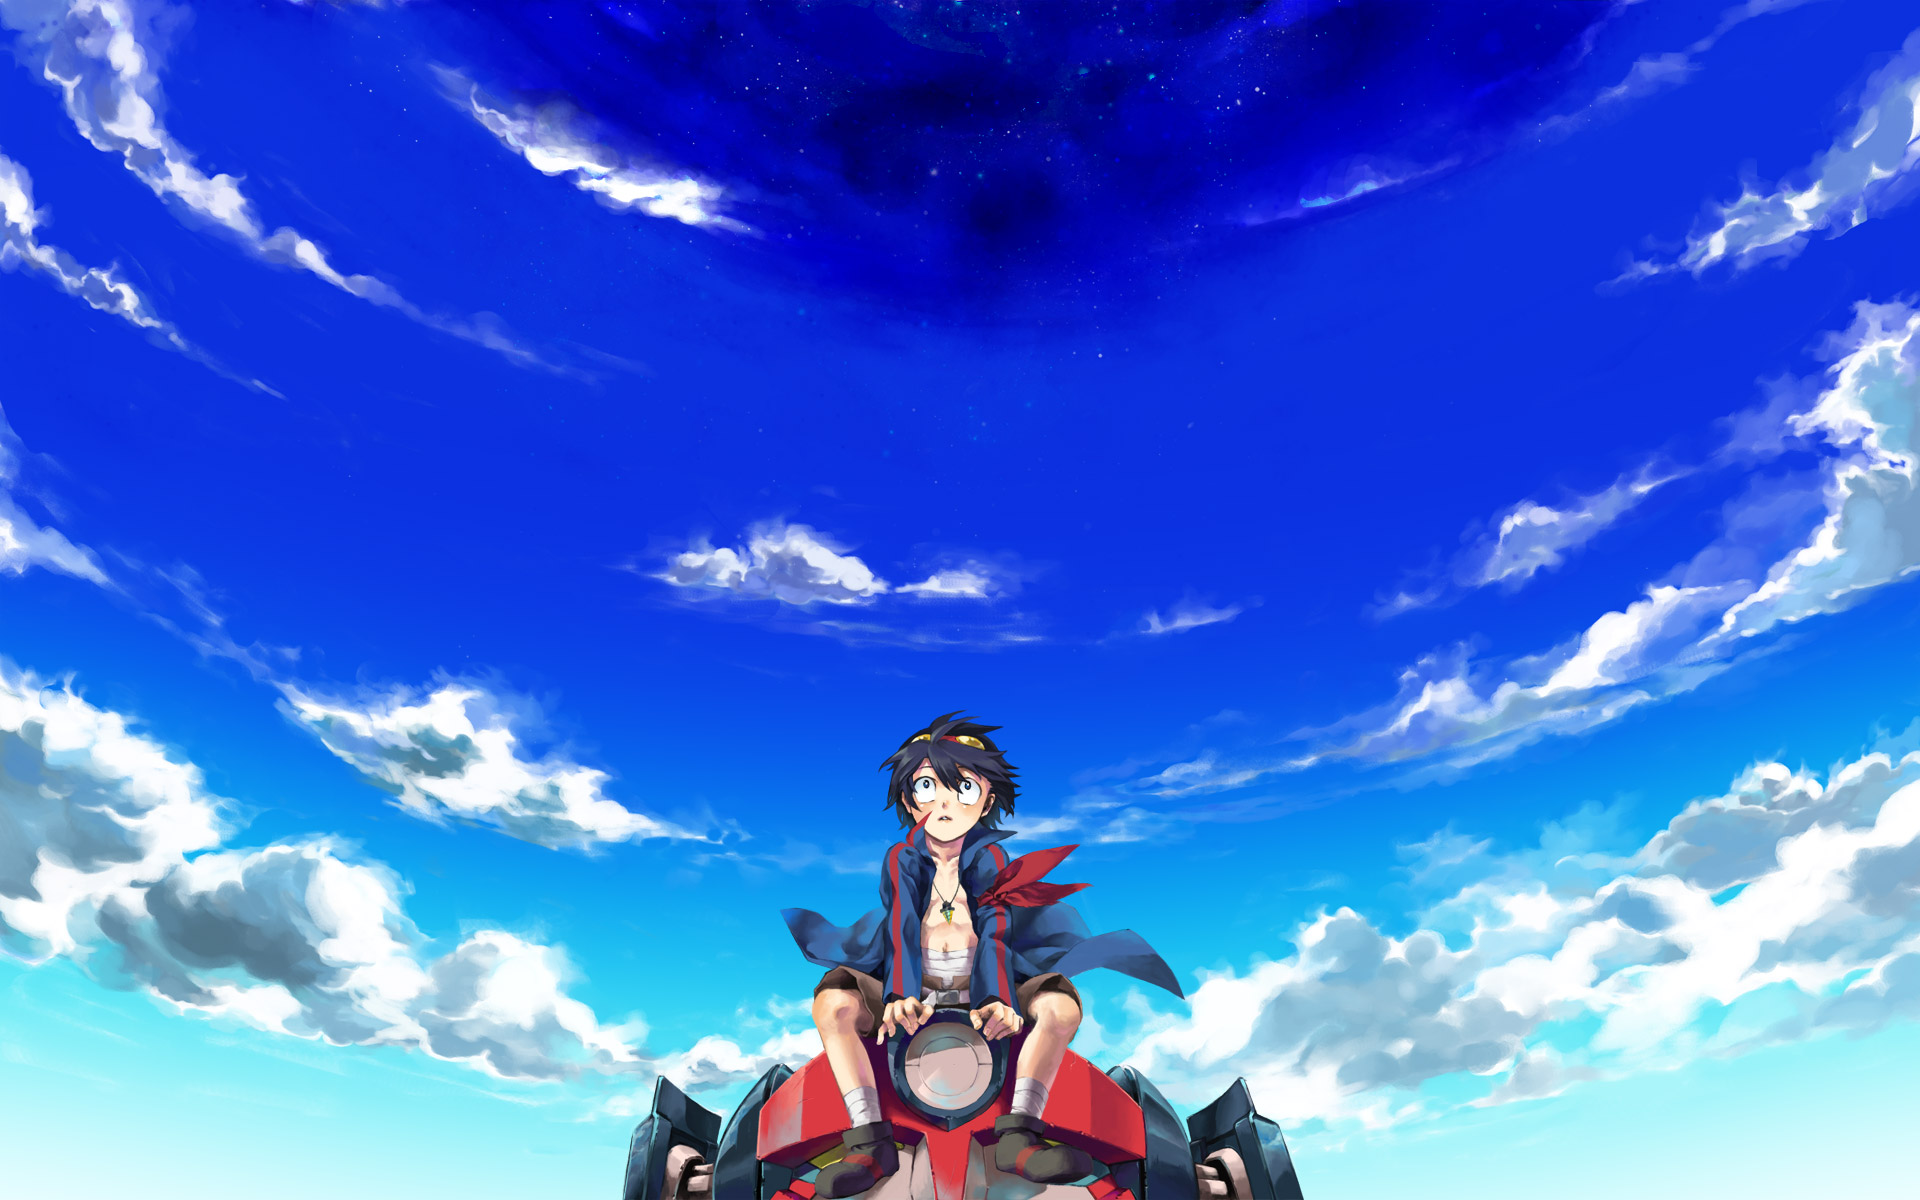 Simon from Tengen Toppa Gurren Lagann standing amidst a cloudy sky, wearing a jacket and a necklace.